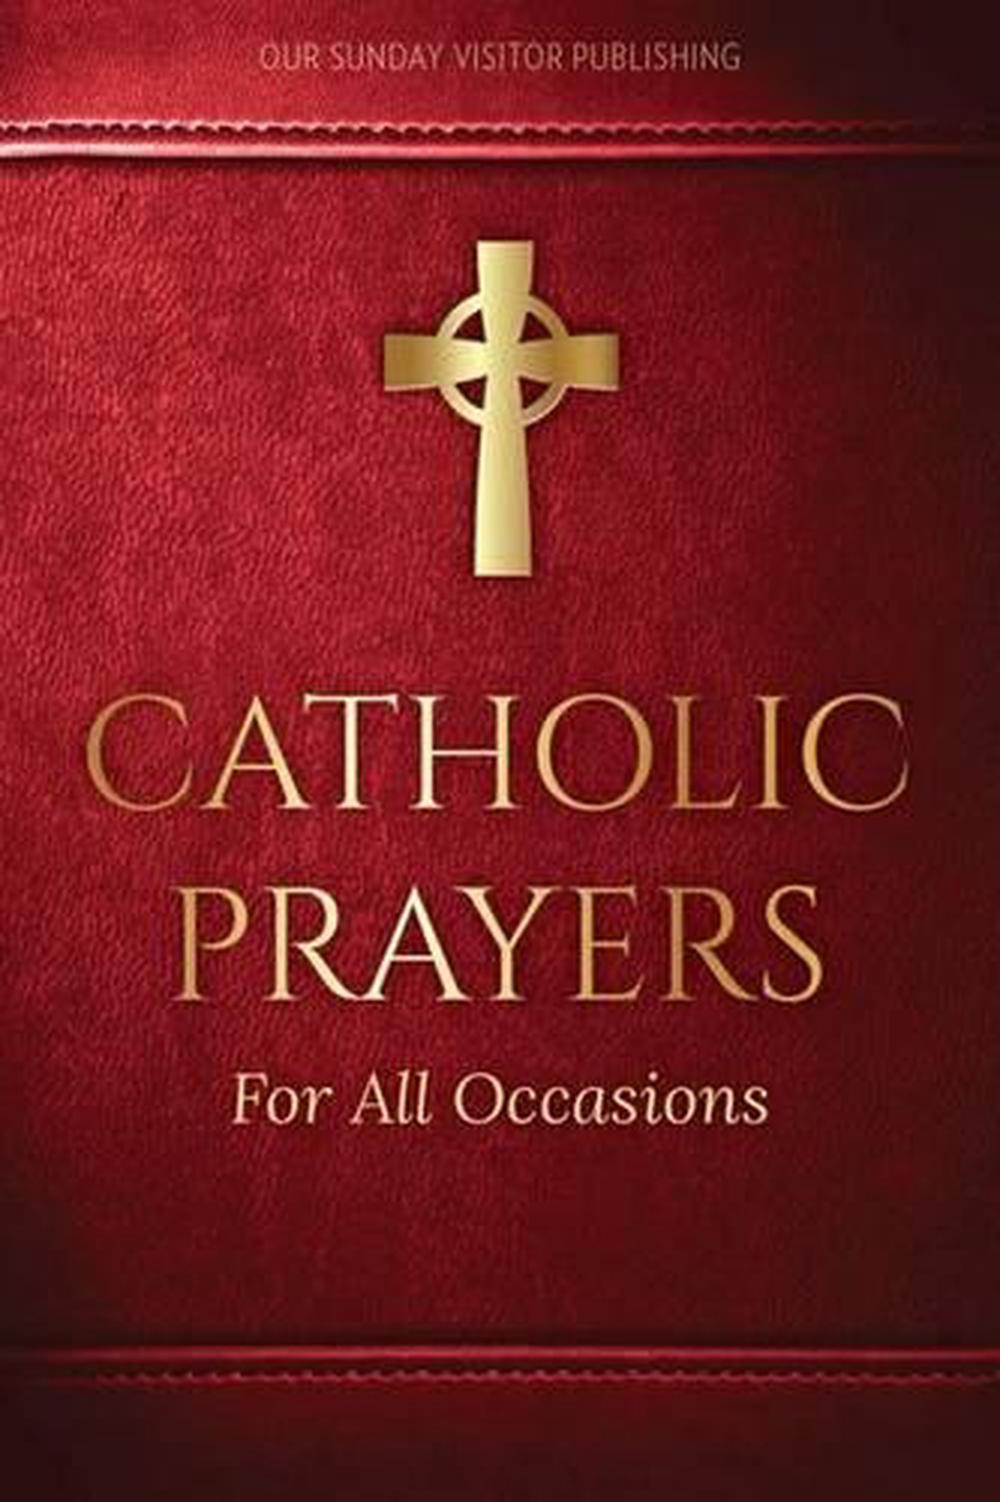 Catholic Prayers for All Occasions (English) Bonded ...